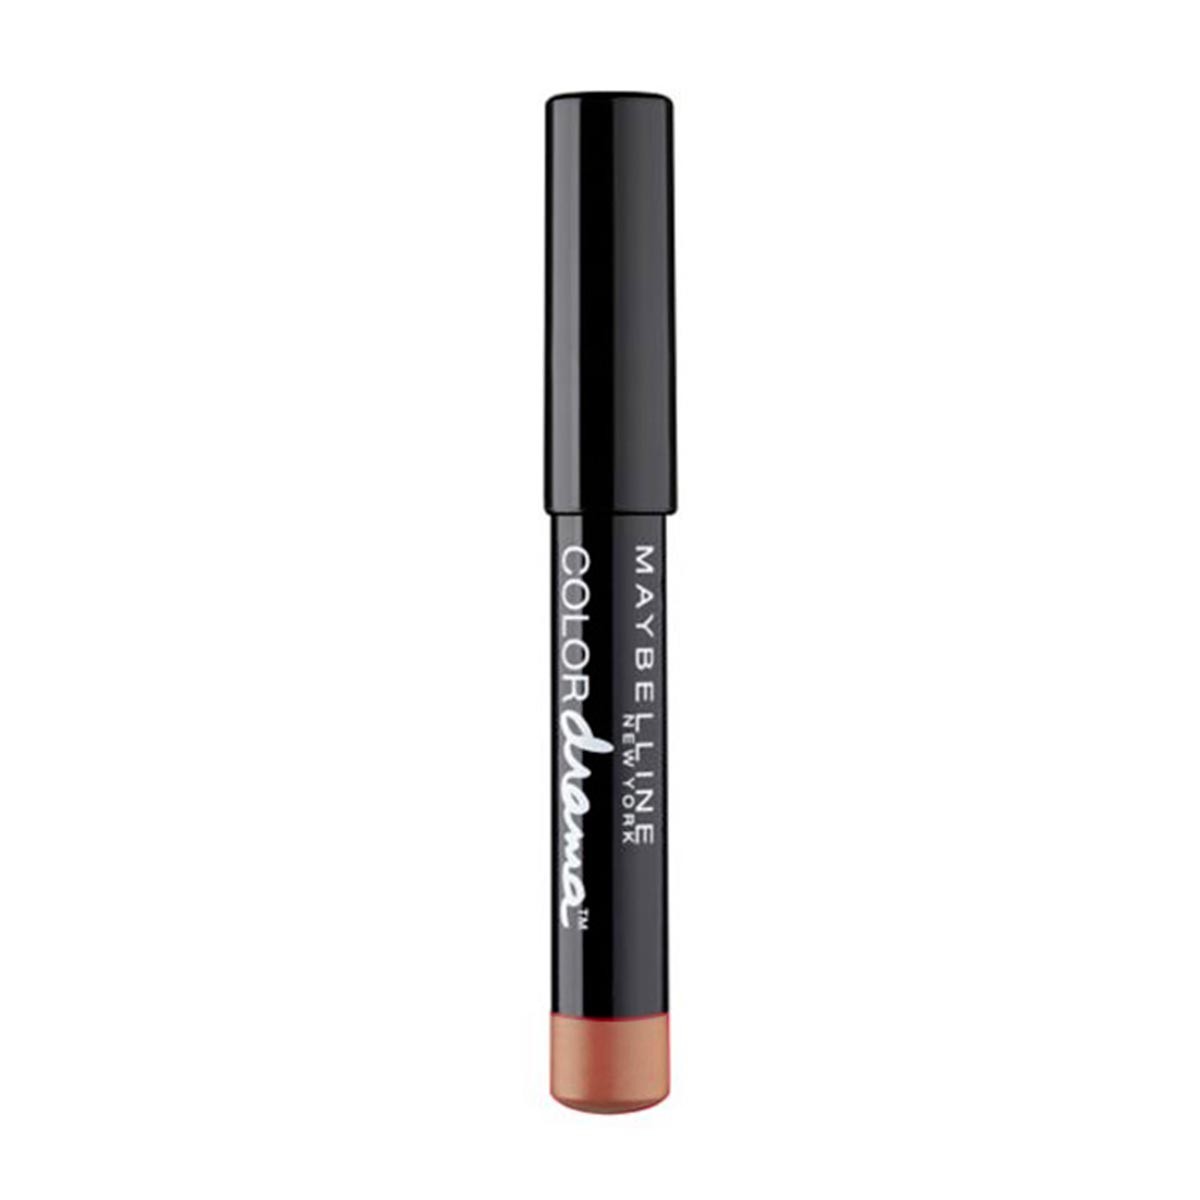 maybelline-lip-color-drama-630-nude-perfection